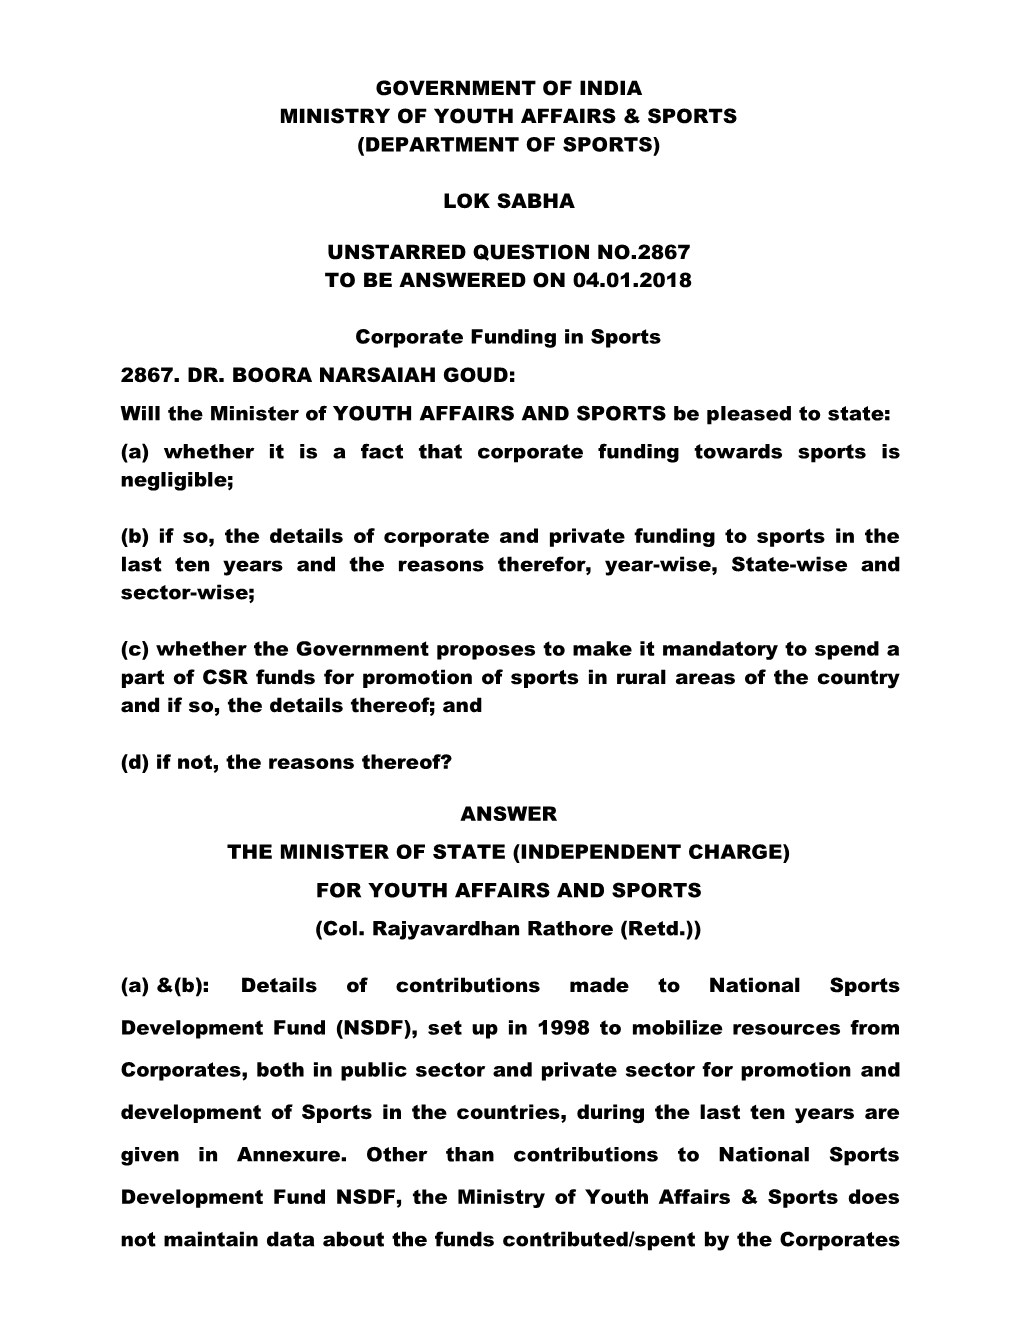 Government of India Ministry of Youth Affairs & Sports (Department of Sports) Lok Sabha Unstarred Question No.2867 to Be